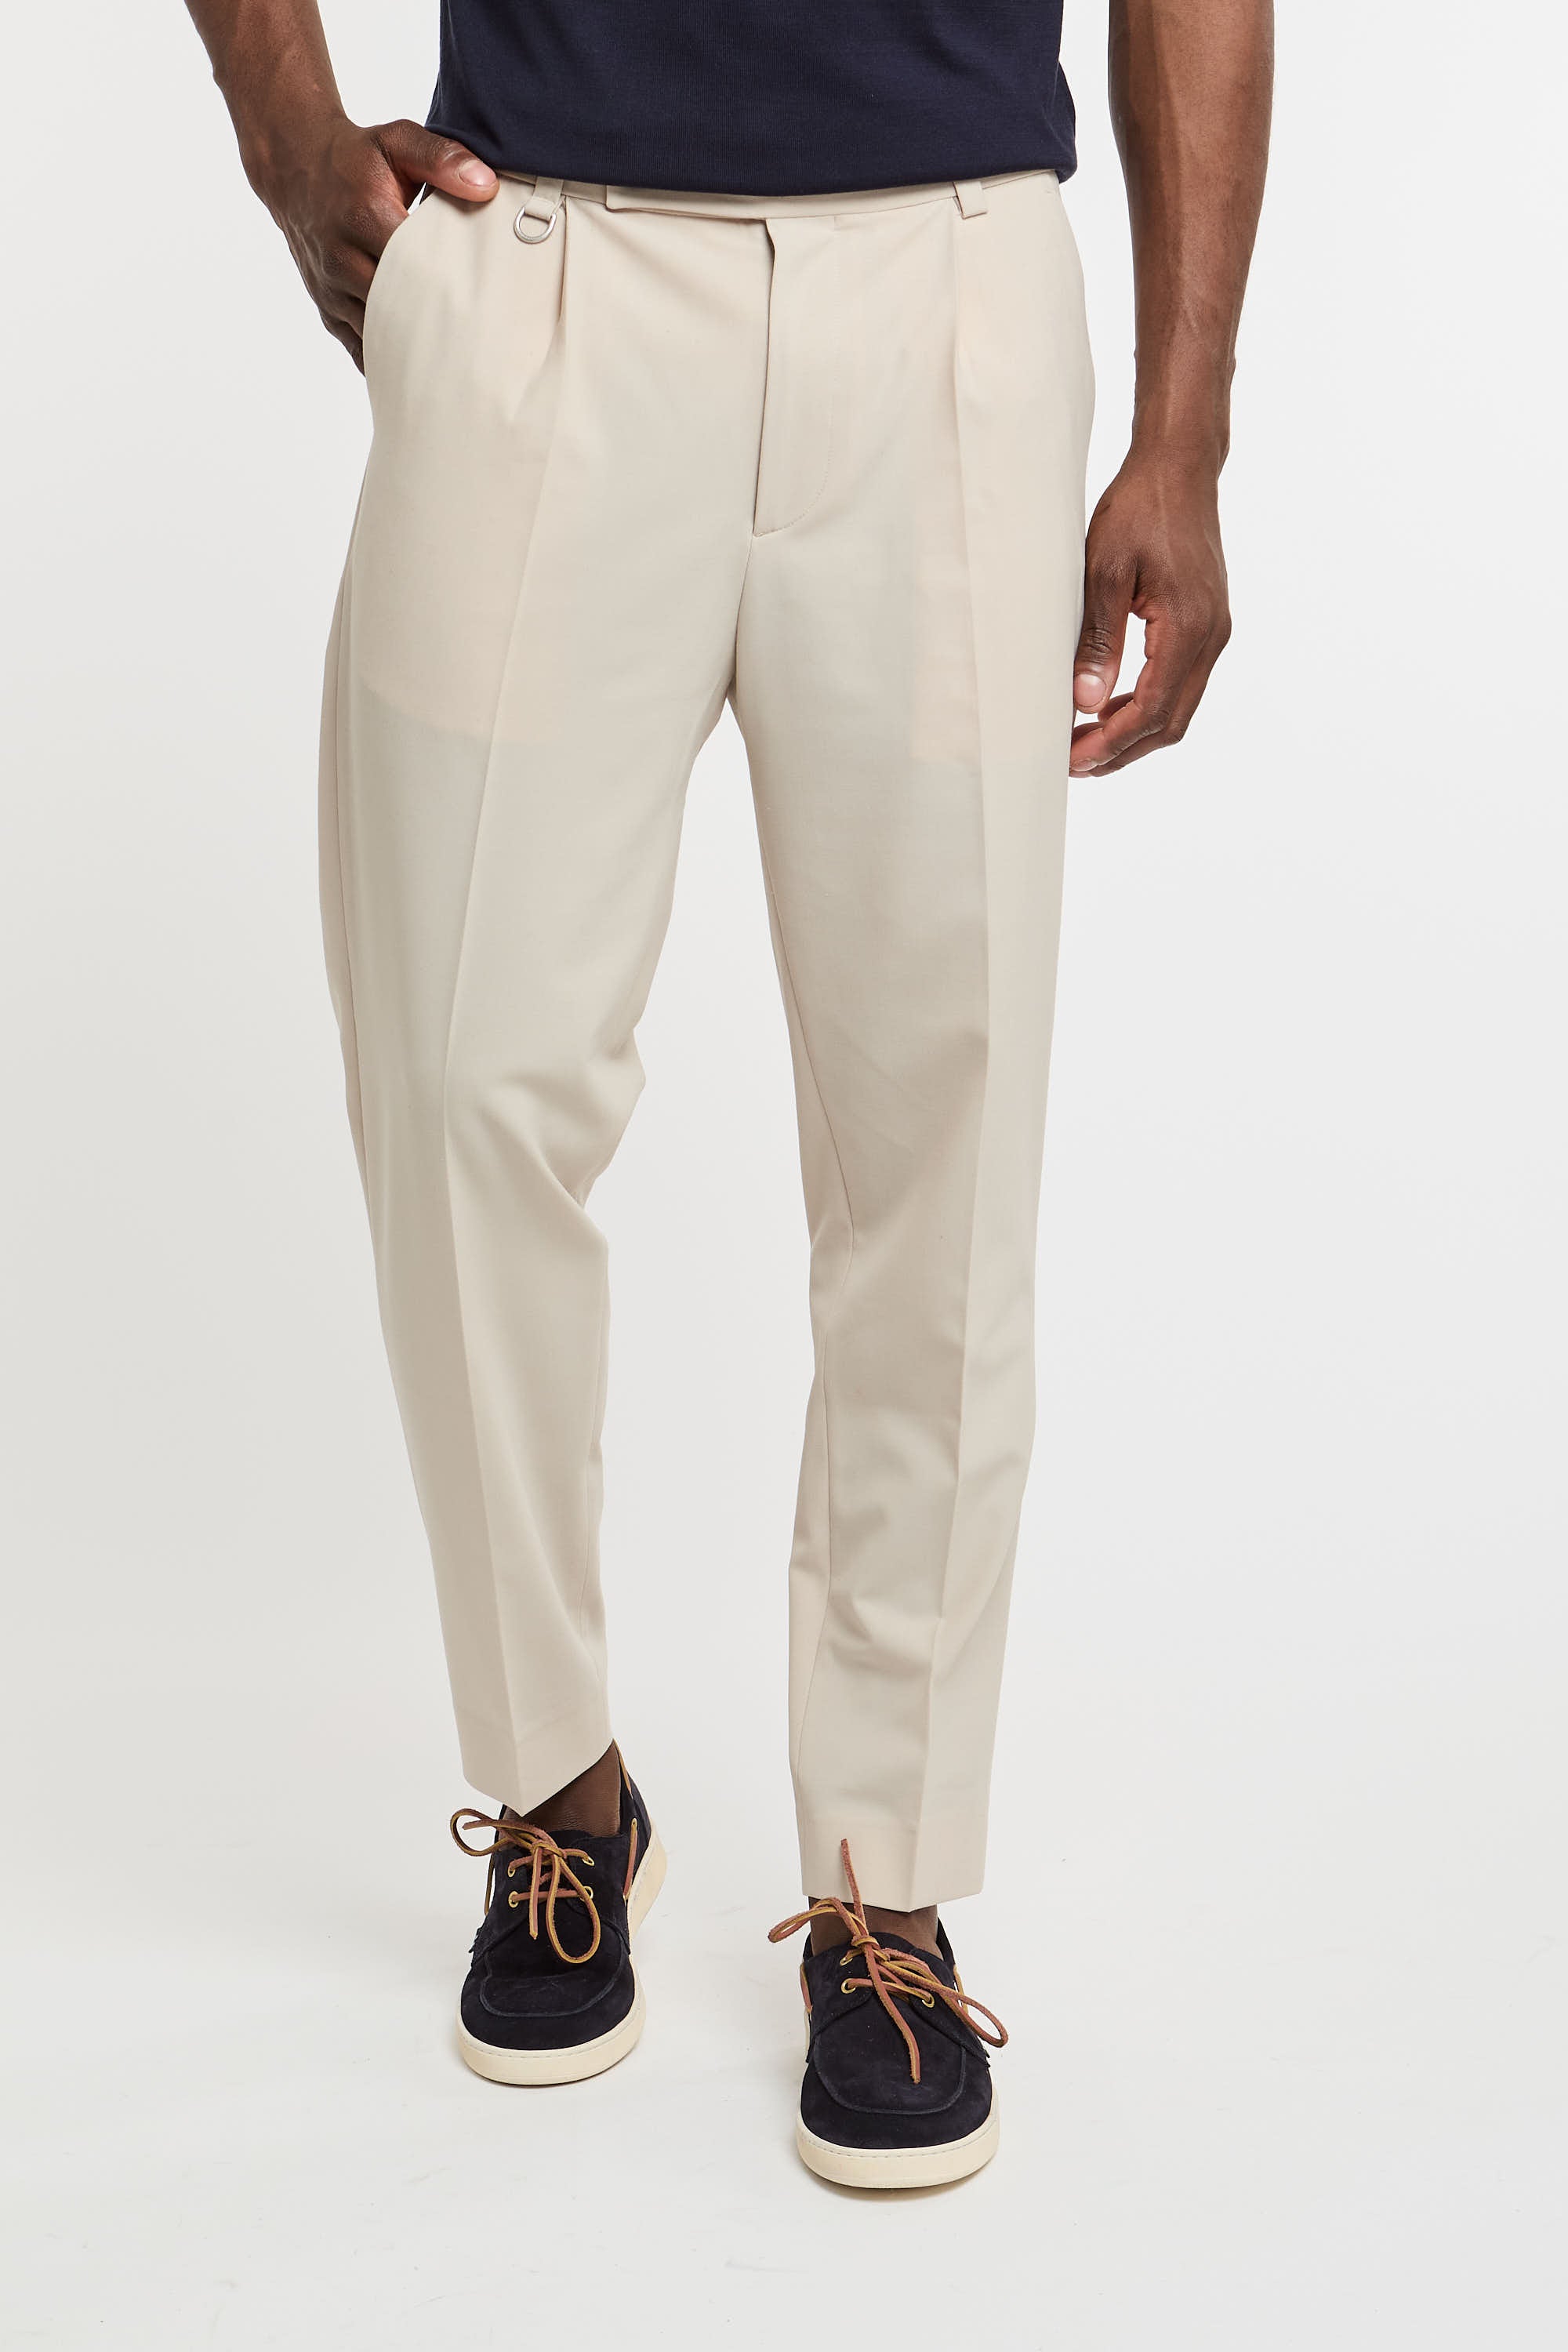 Paolo Pecora Beige Wool/Polyester Mix Trousers-1